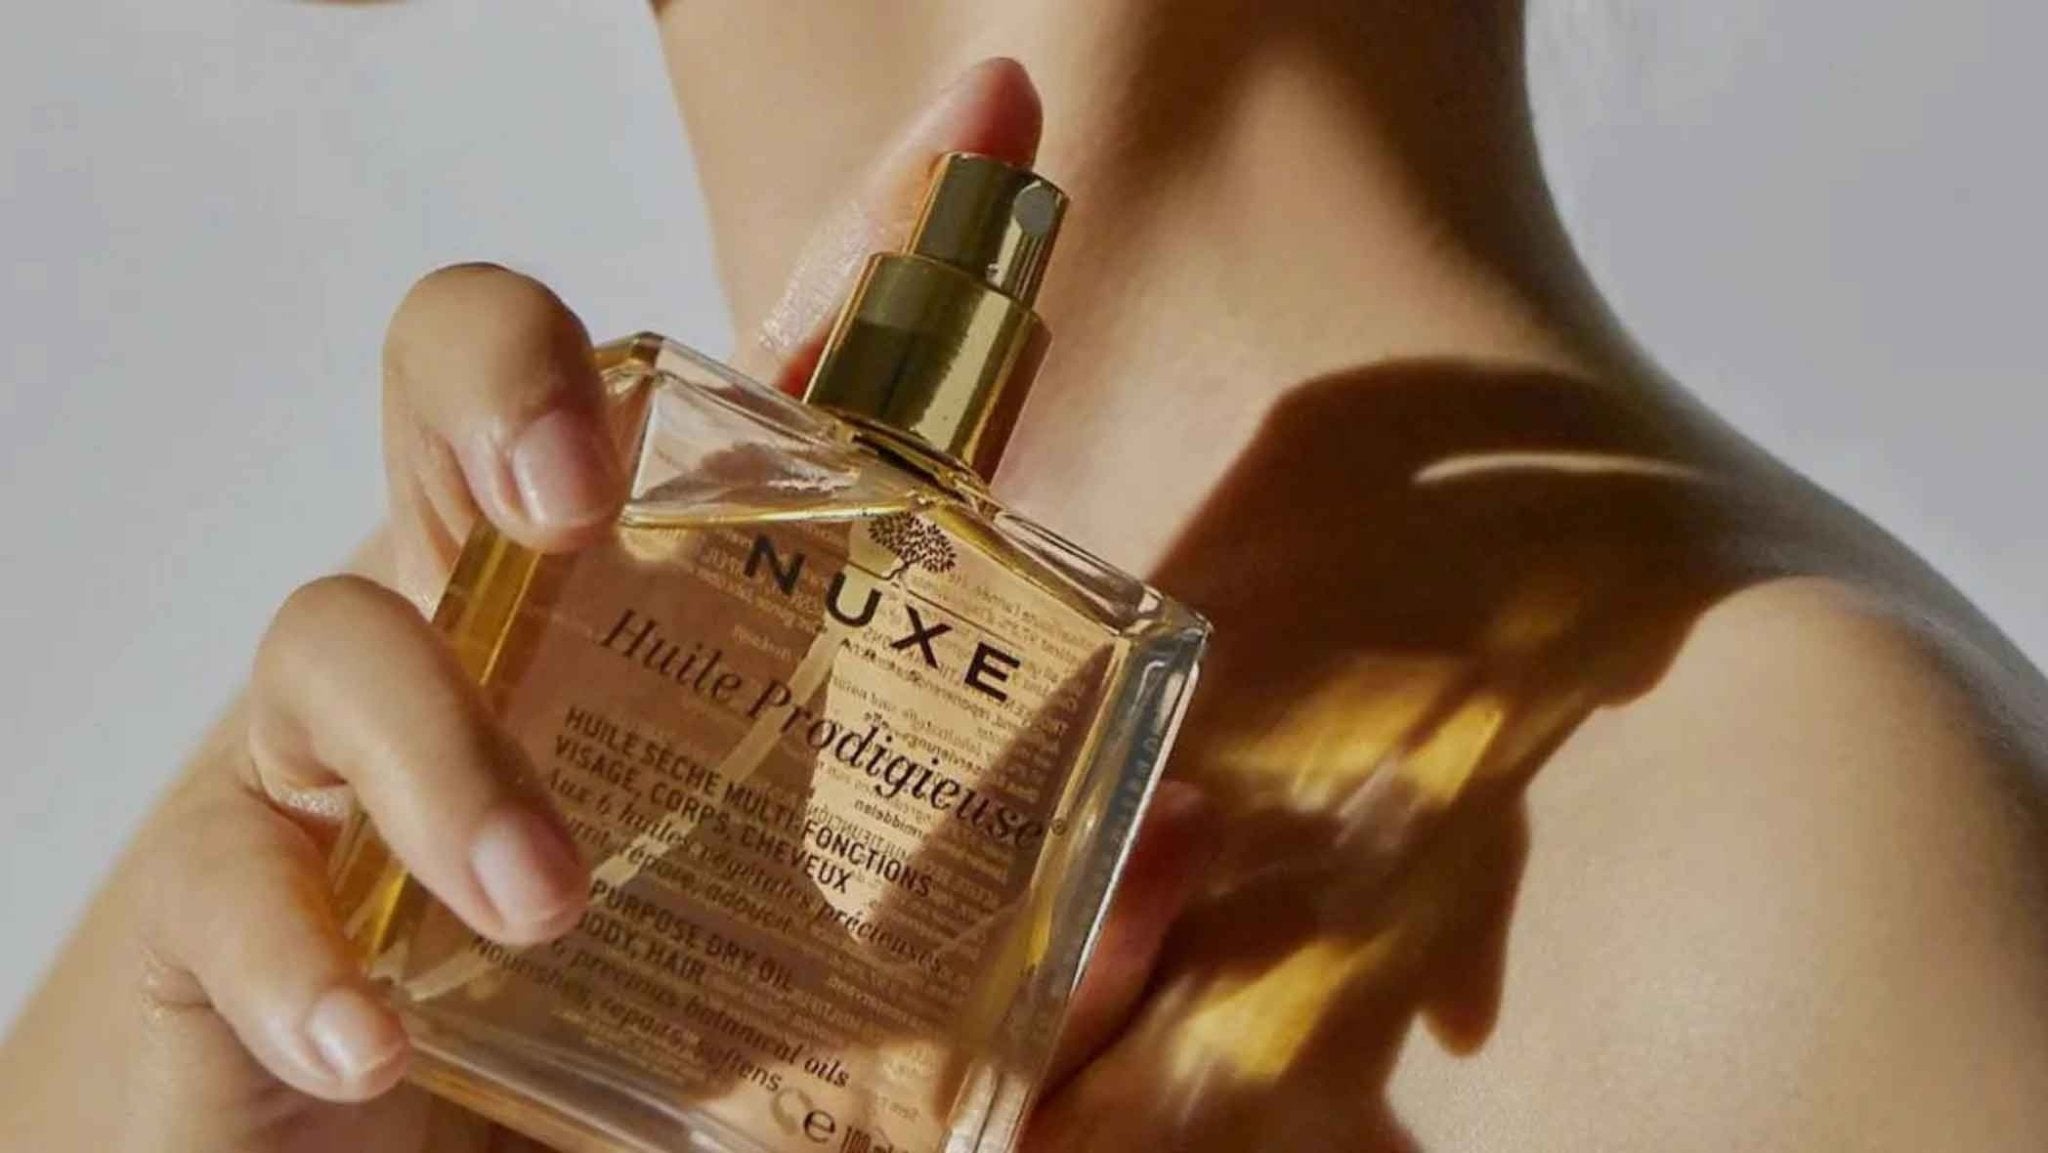 BRAND SPOTLIGHT: NUXE - French Beauty Co.